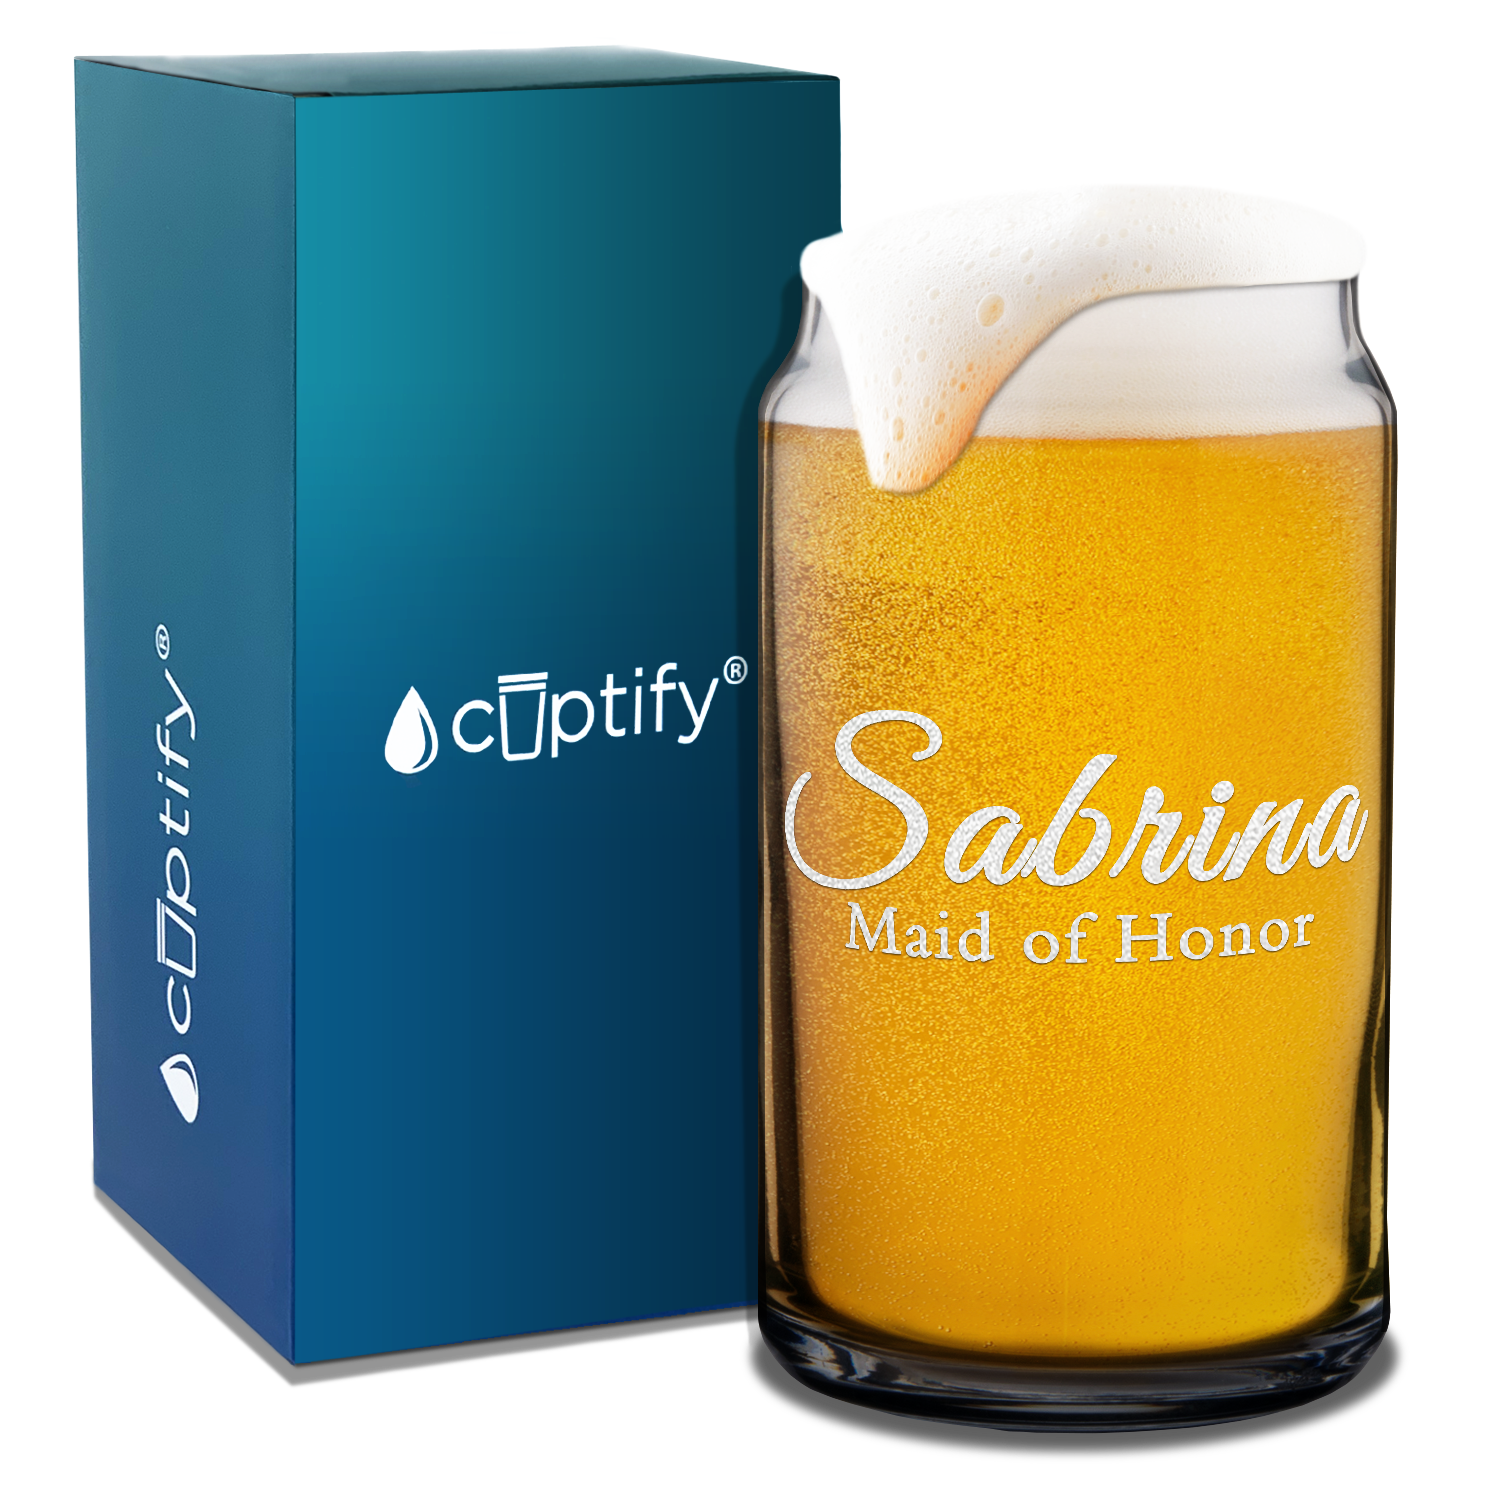  Personalized Maid of Honor Etched on 16 oz Beer Glass Can